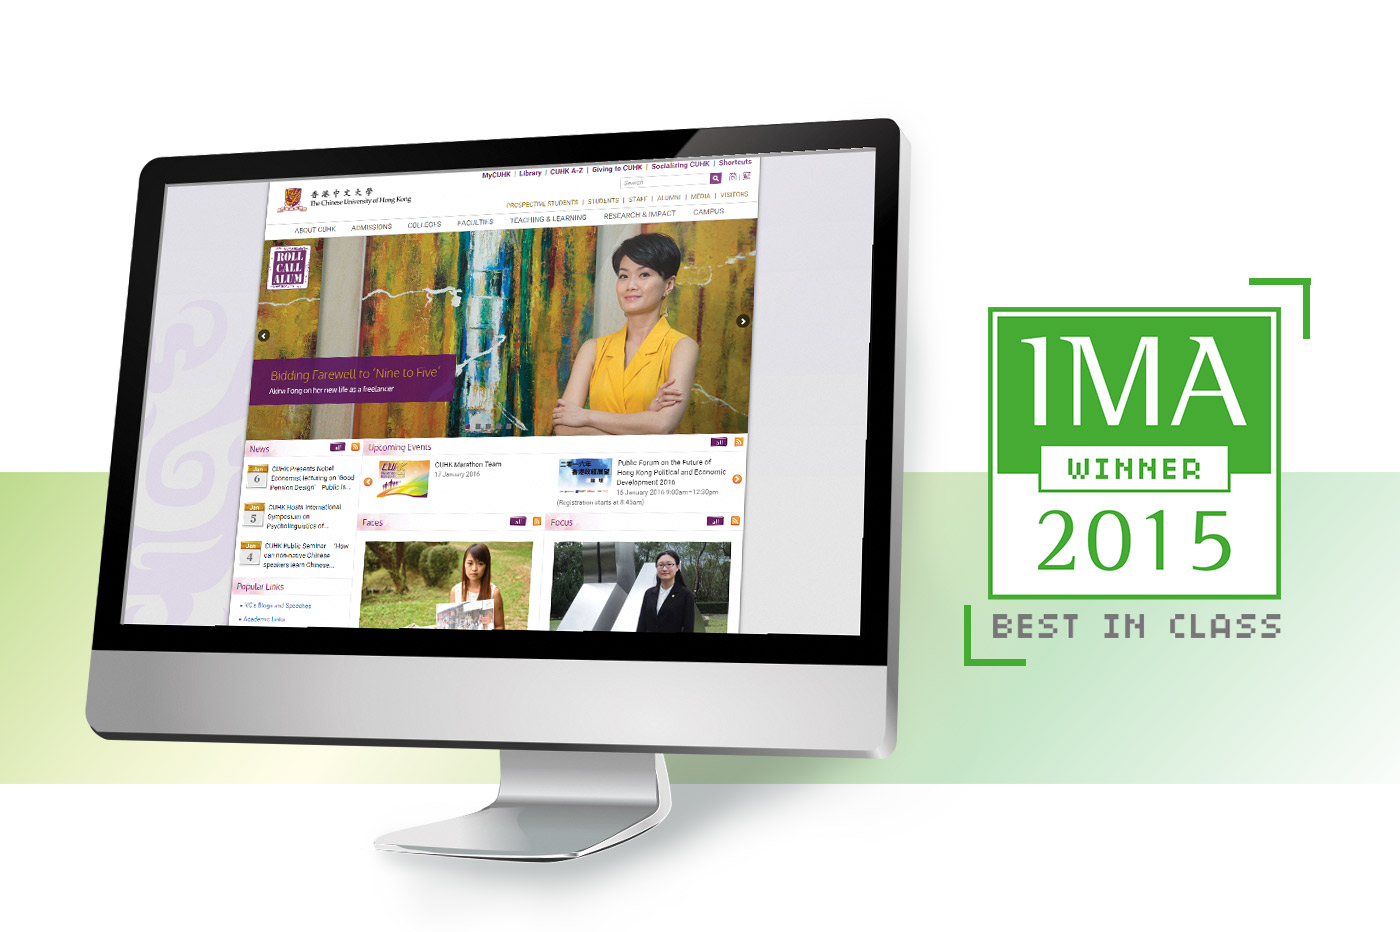 CUHK Website Wins ‘Best in Class’ at the Interactive Media Awards 2015 (University Category)